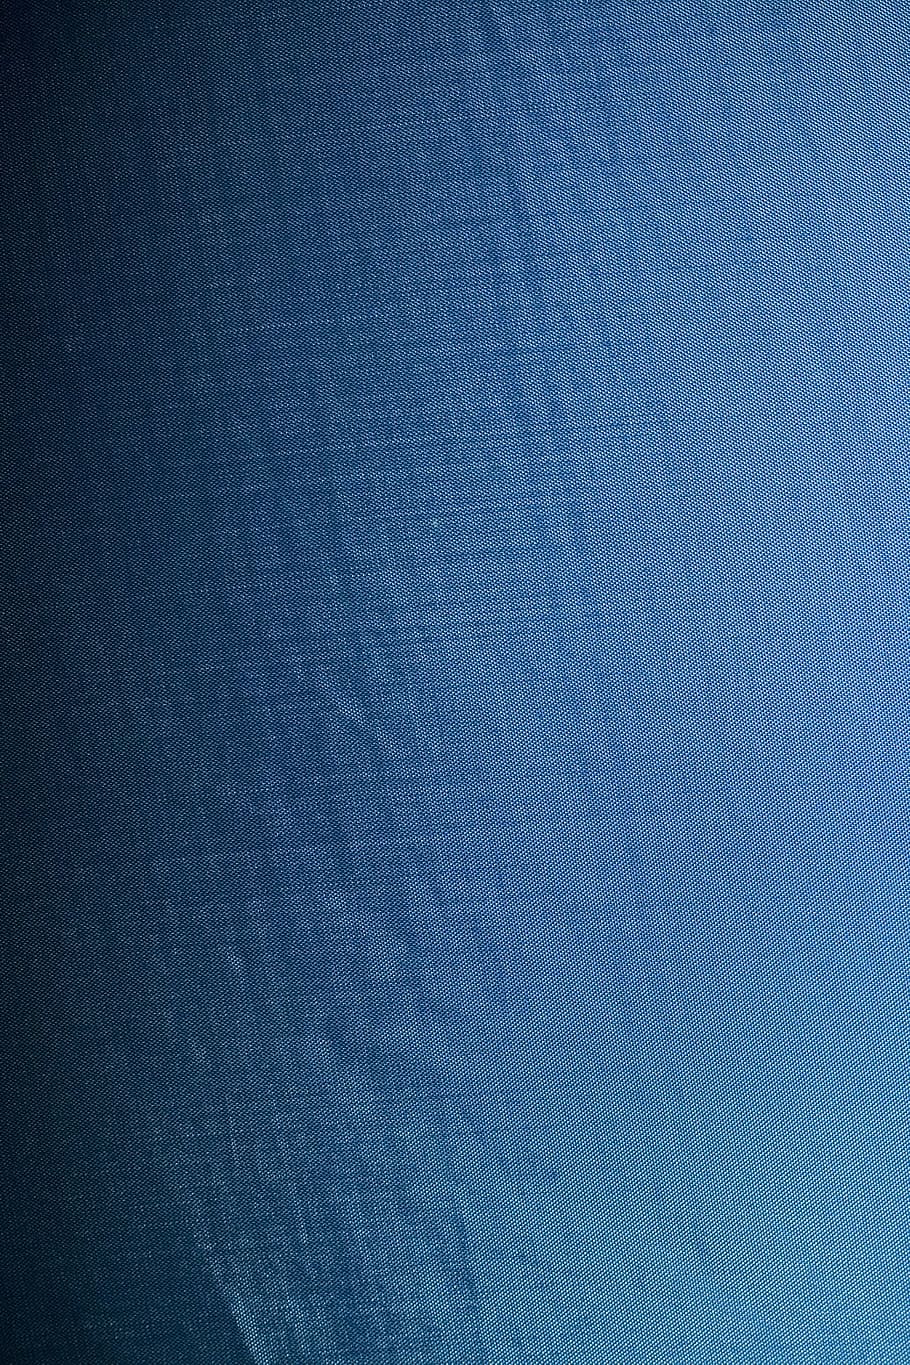 backdrop, backgrounds, blank, blue, canvas, close-up, cloth